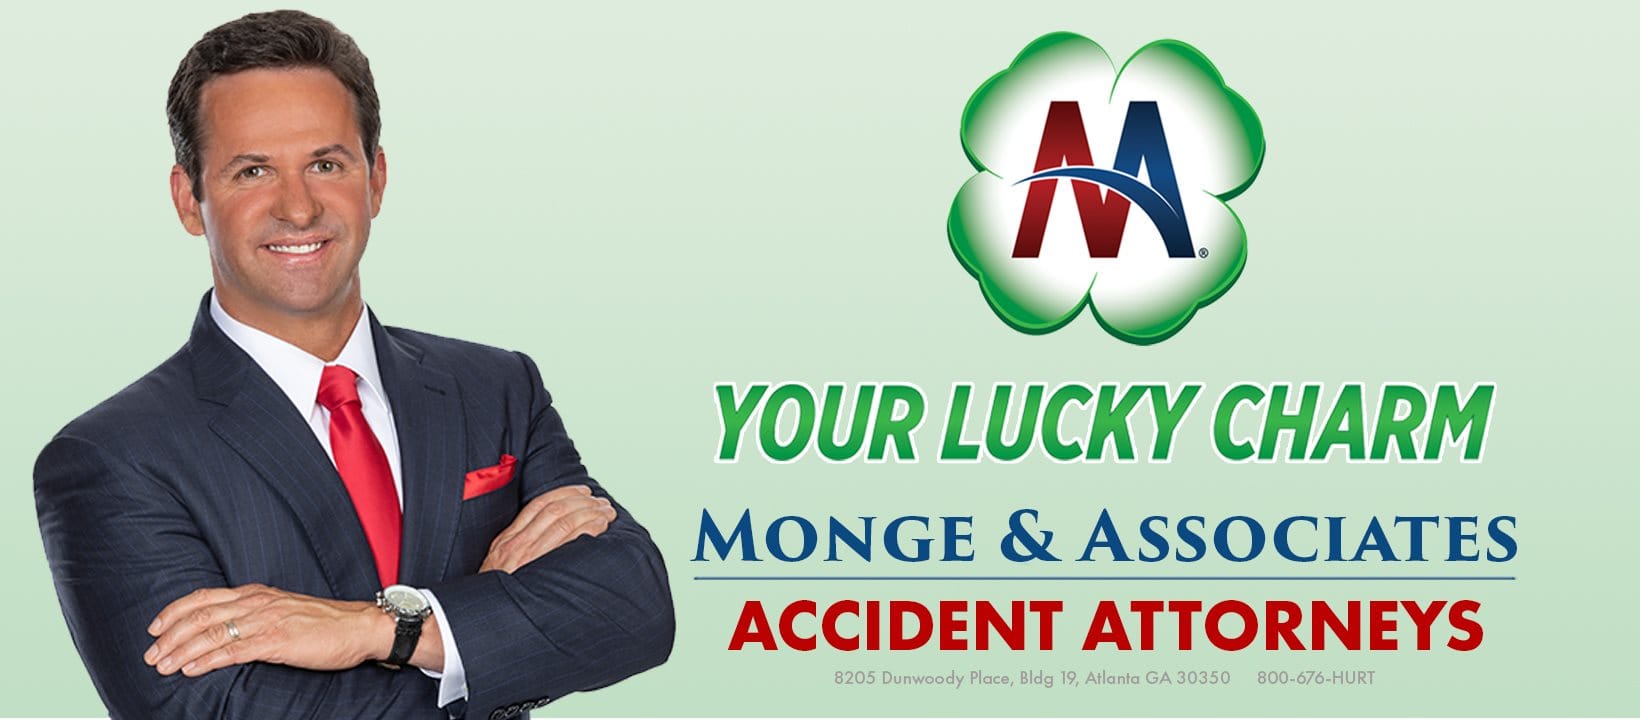 Monge & Associates Injury and Accident Attorneys - West Des Moines (IA 50265), US, car crashes